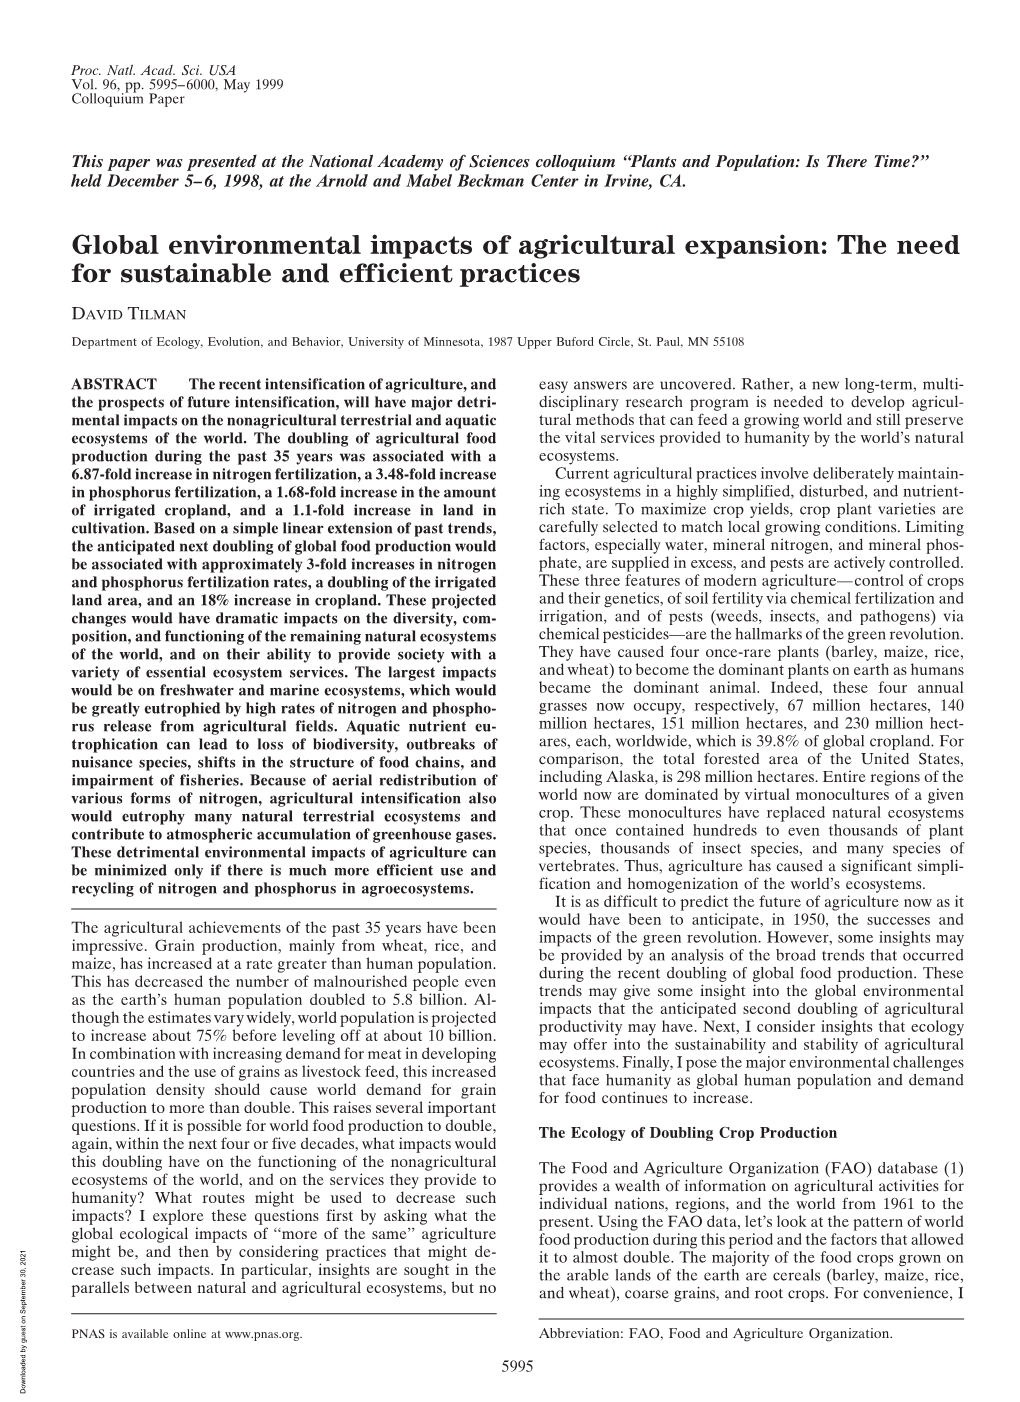 Global Environmental Impacts of Agricultural Expansion: the Need for Sustainable and Efficient Practices